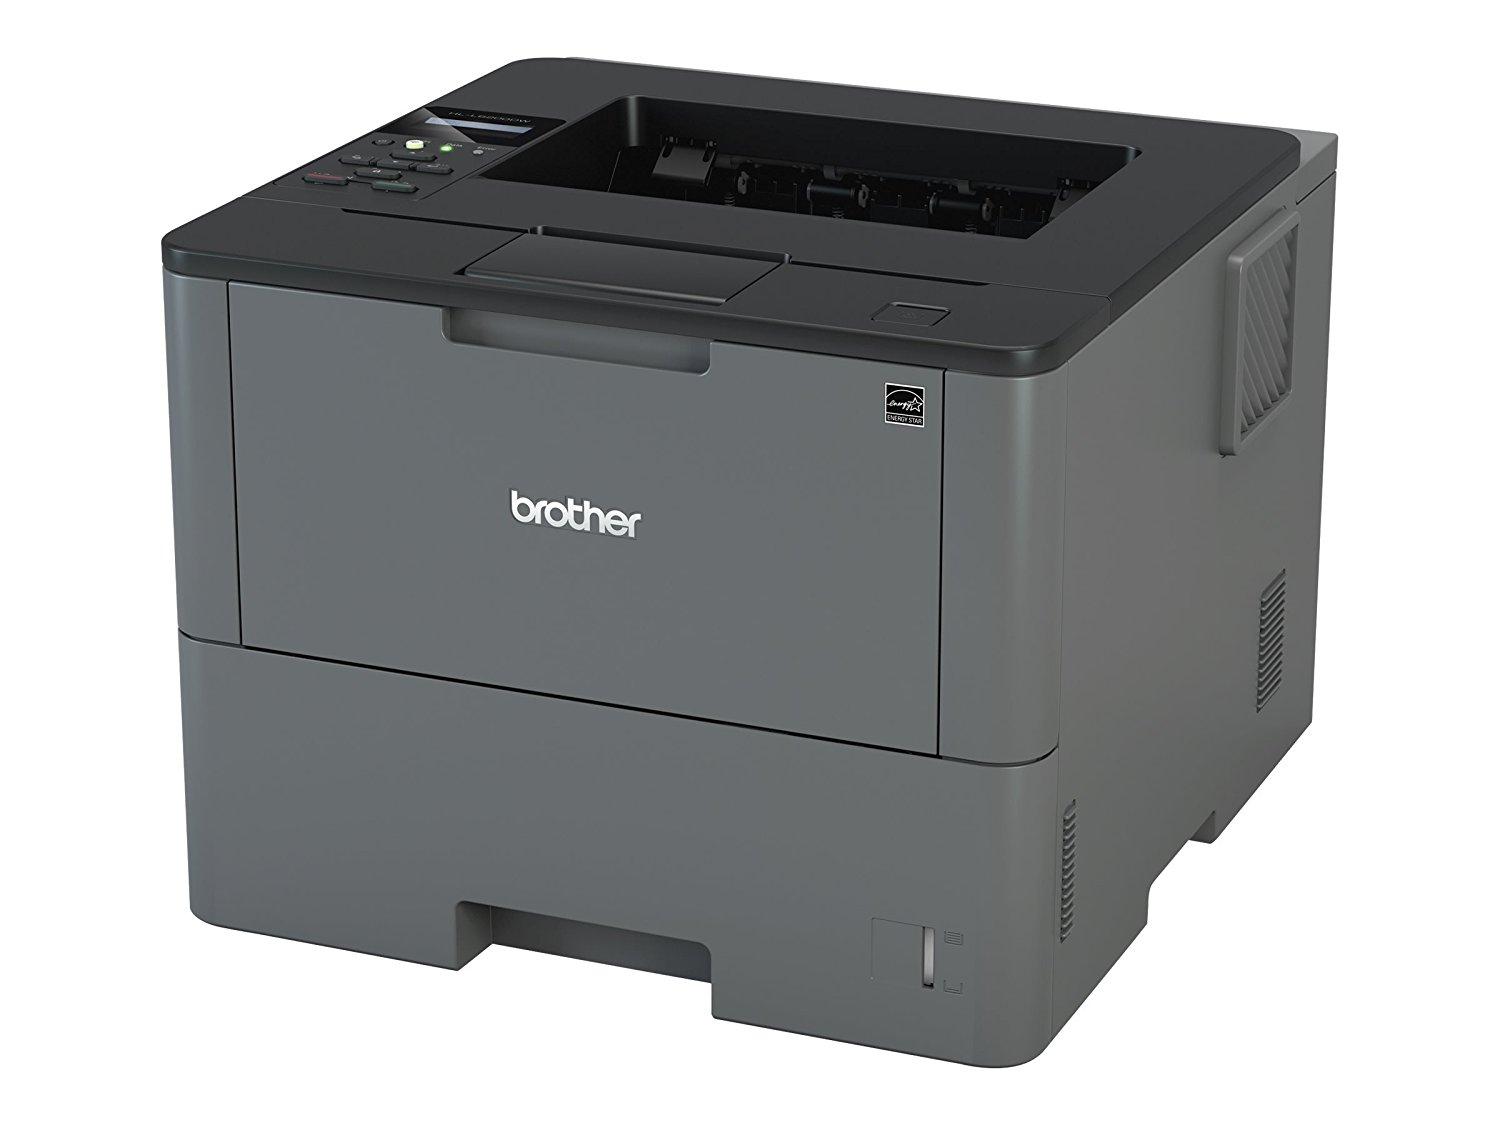 Best Wireless Laser Printers for Home and Office Use in 2019